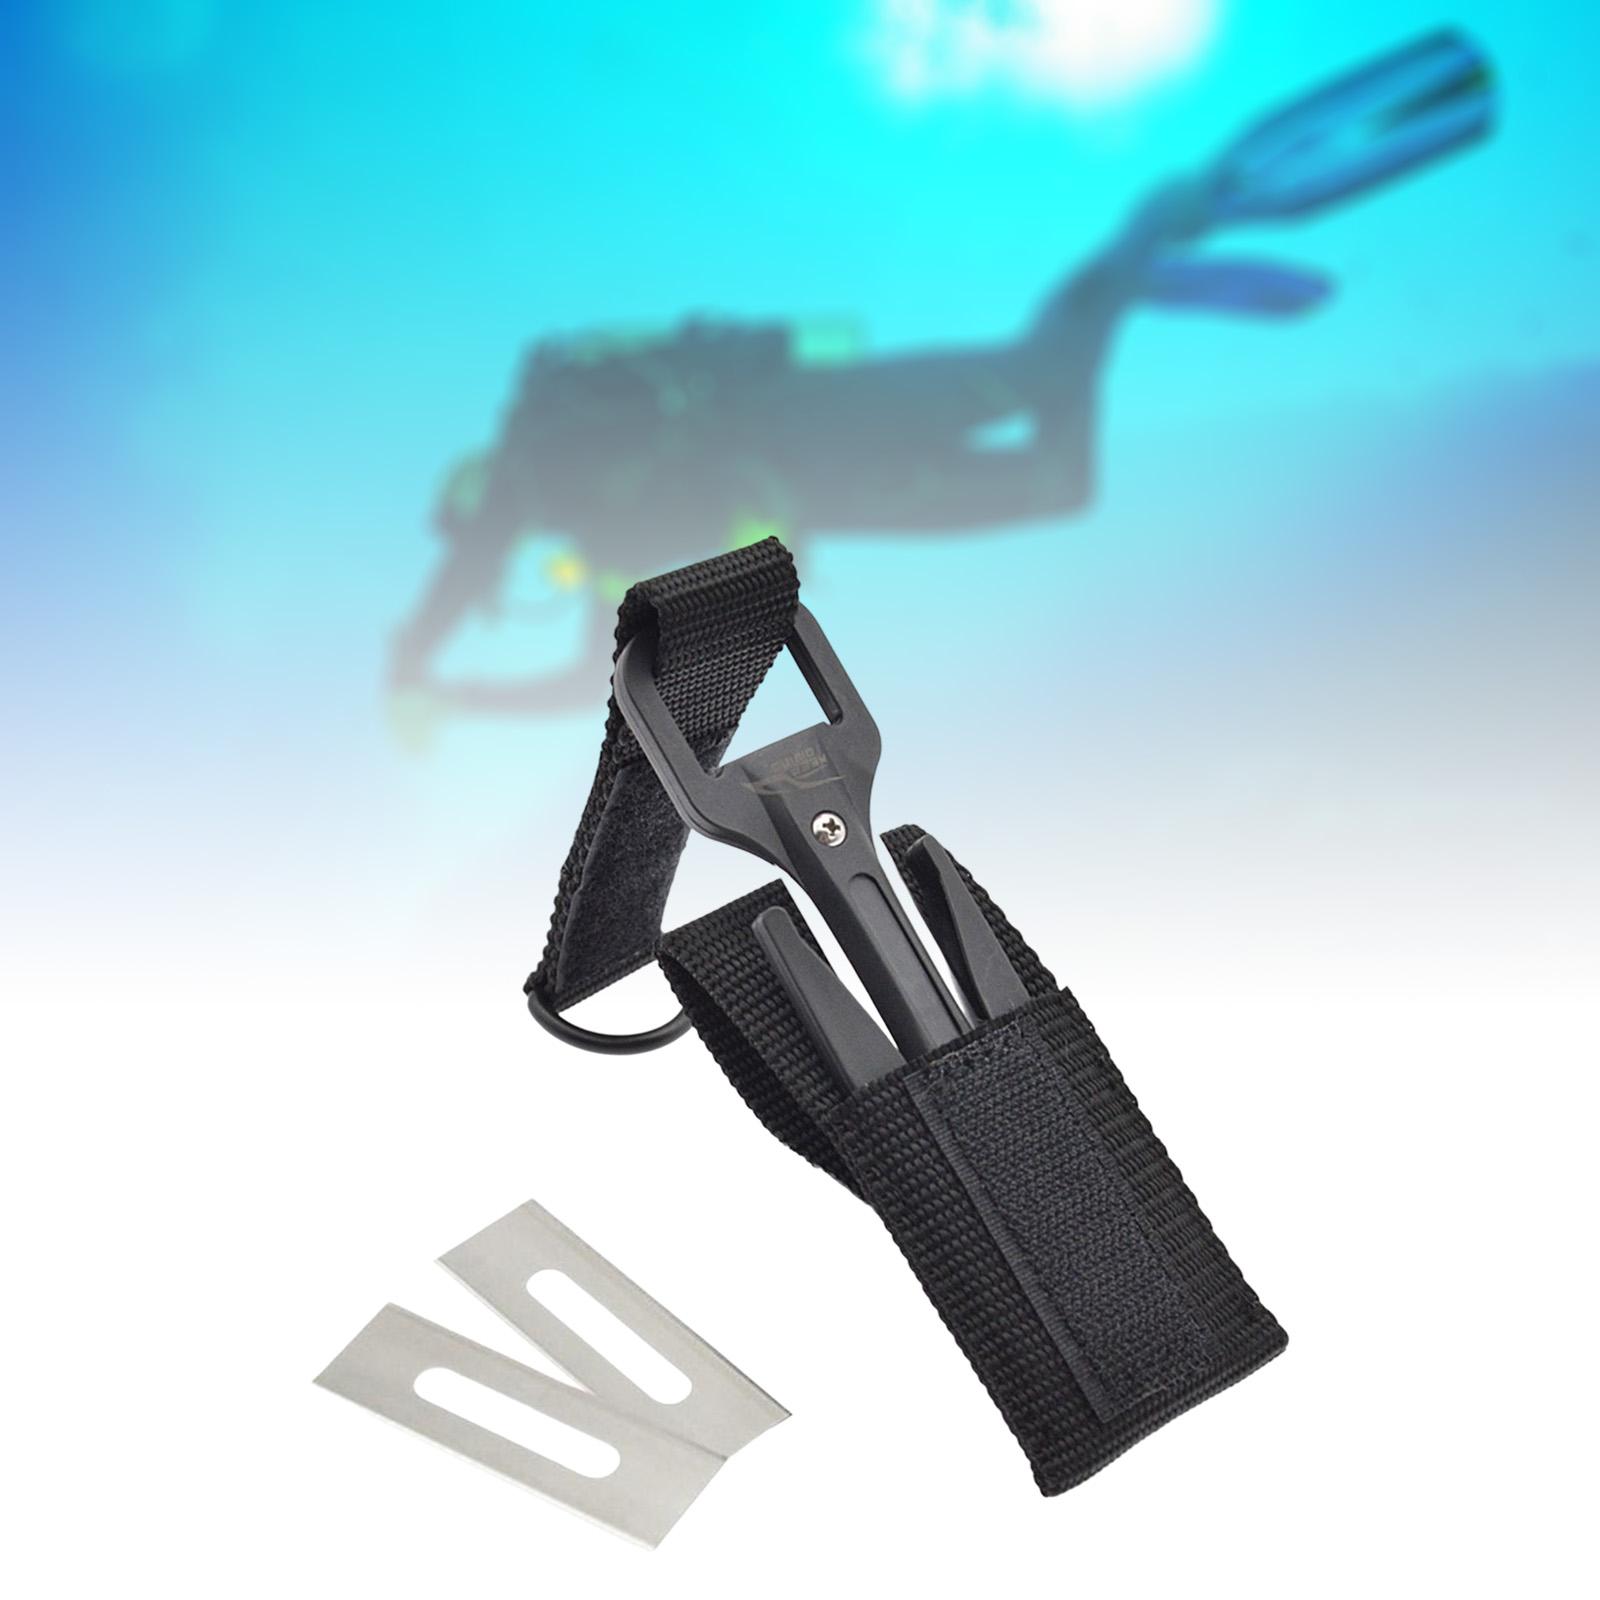 Scuba Dive Line Cutter with Webbing Snorkeling Knives for Underwater Diving